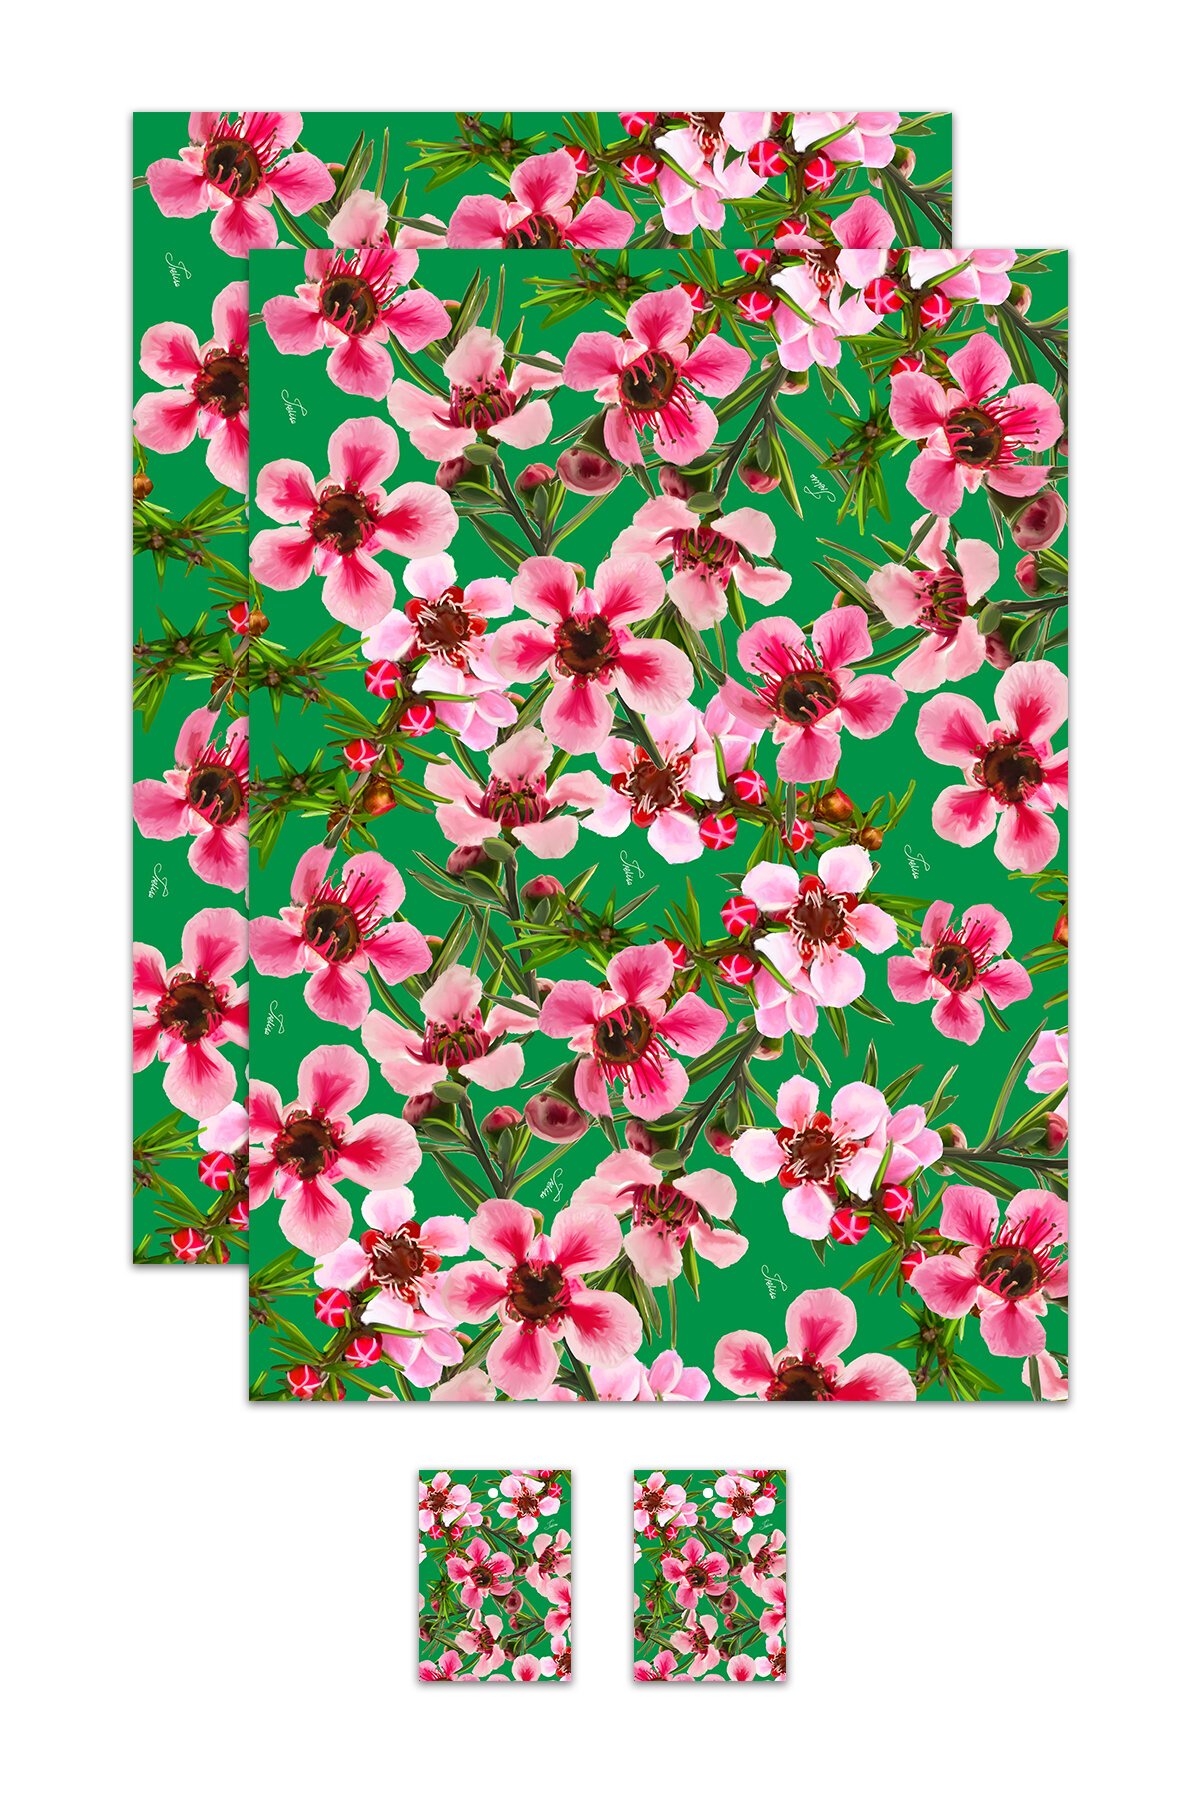 KIWIANA Wrapping Paper & Card Set - Home & Gift : Trelise Cooper Online -  LIMITED EDITION XMAS 22 TRELISE COOPER